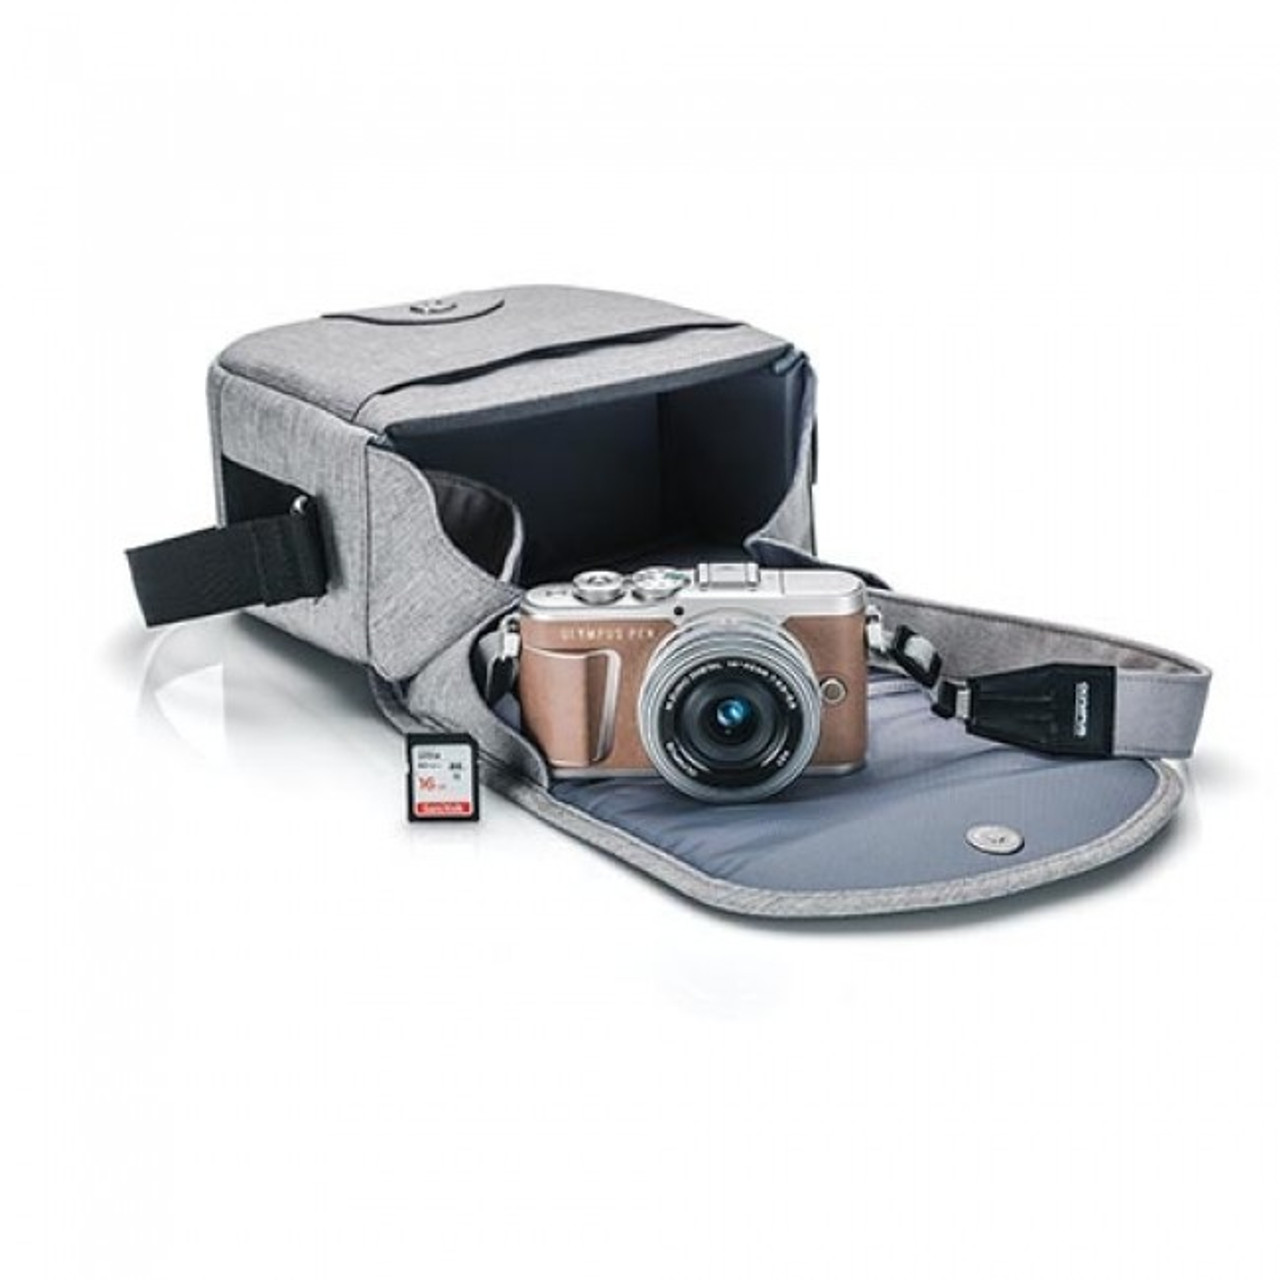 OLYMPUS E-PL9 BROWN BODY WITH 14-42 IIR LENS KIT